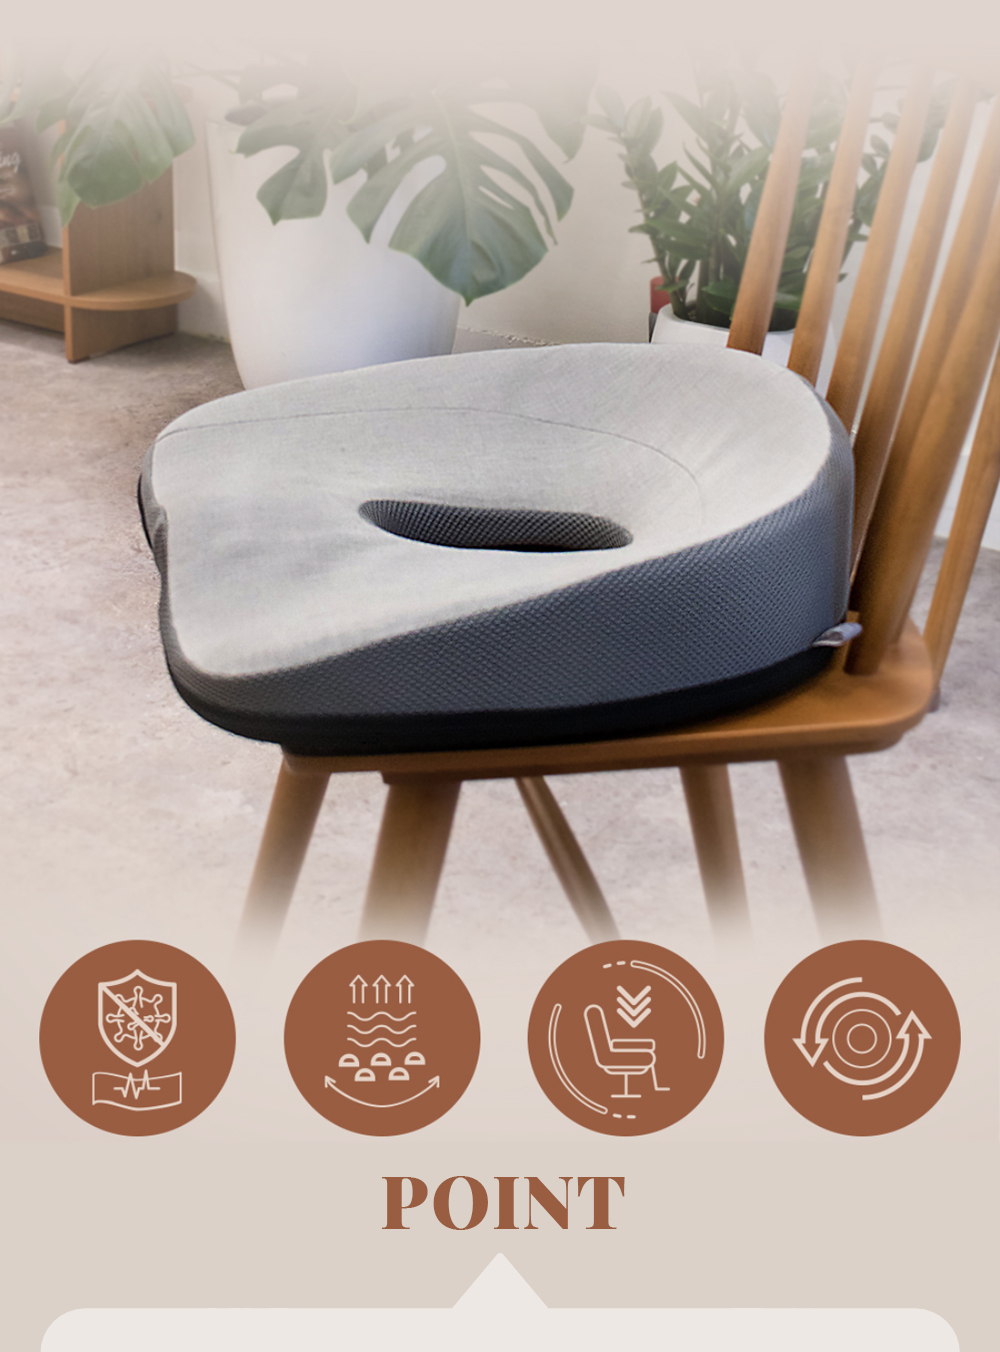 Female Male Hemorrhoid Pain Relief Car Seat Donut Cushion Tailbone Prostate  Protective Care Pad Pregnancy Women Seat Cushions - Automobiles Seat Covers  - AliExpress